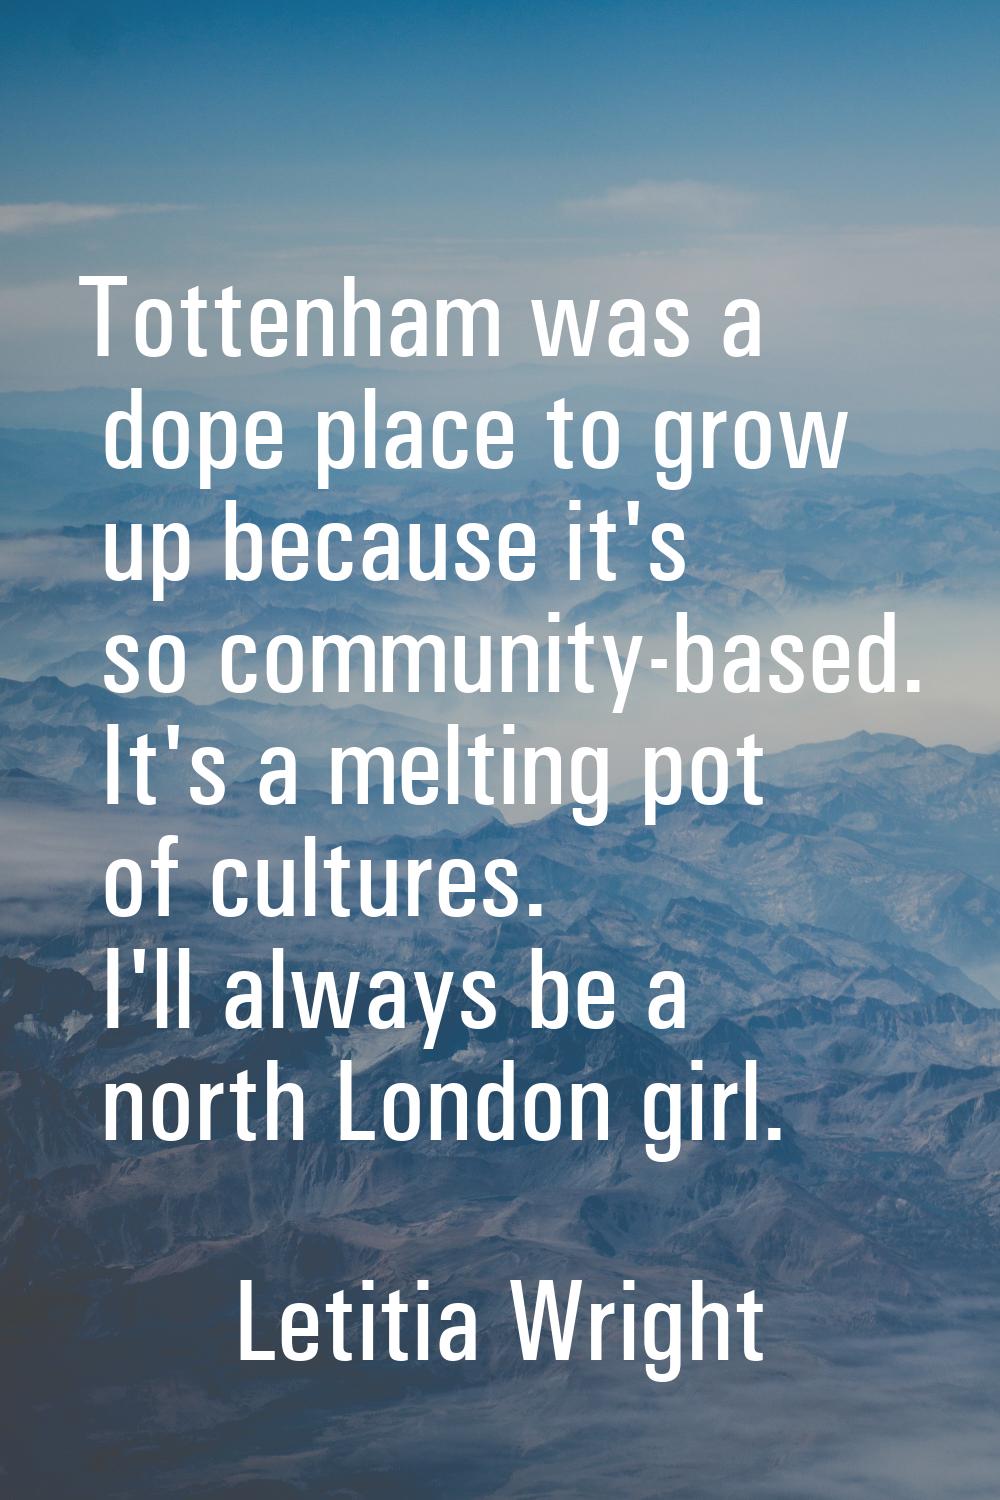 Tottenham was a dope place to grow up because it's so community-based. It's a melting pot of cultur